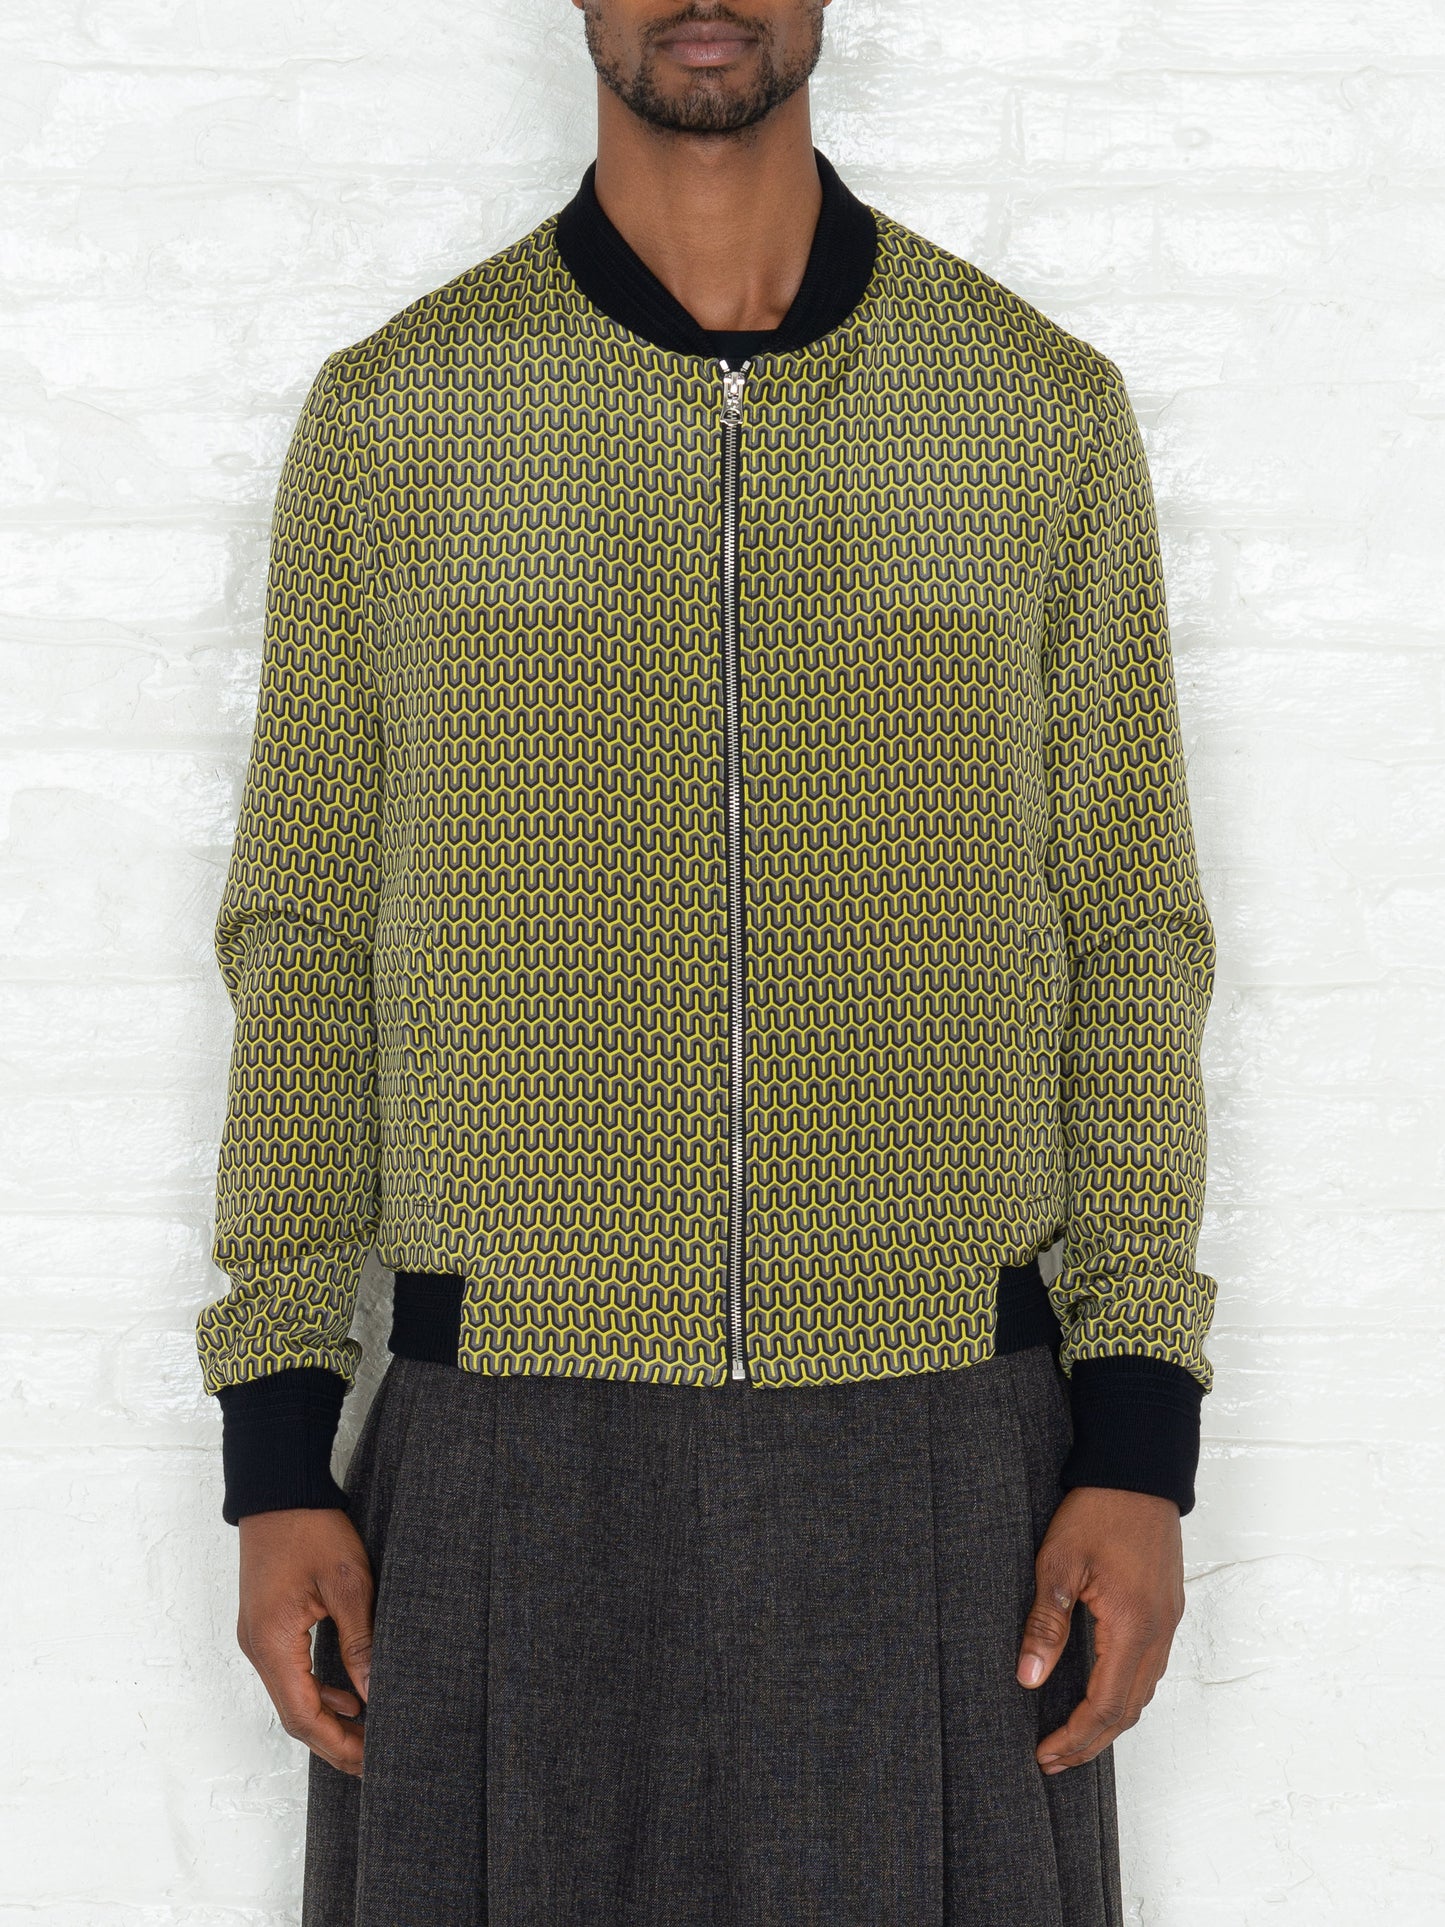 "The Classic Bomber" in a Green Patterned Print